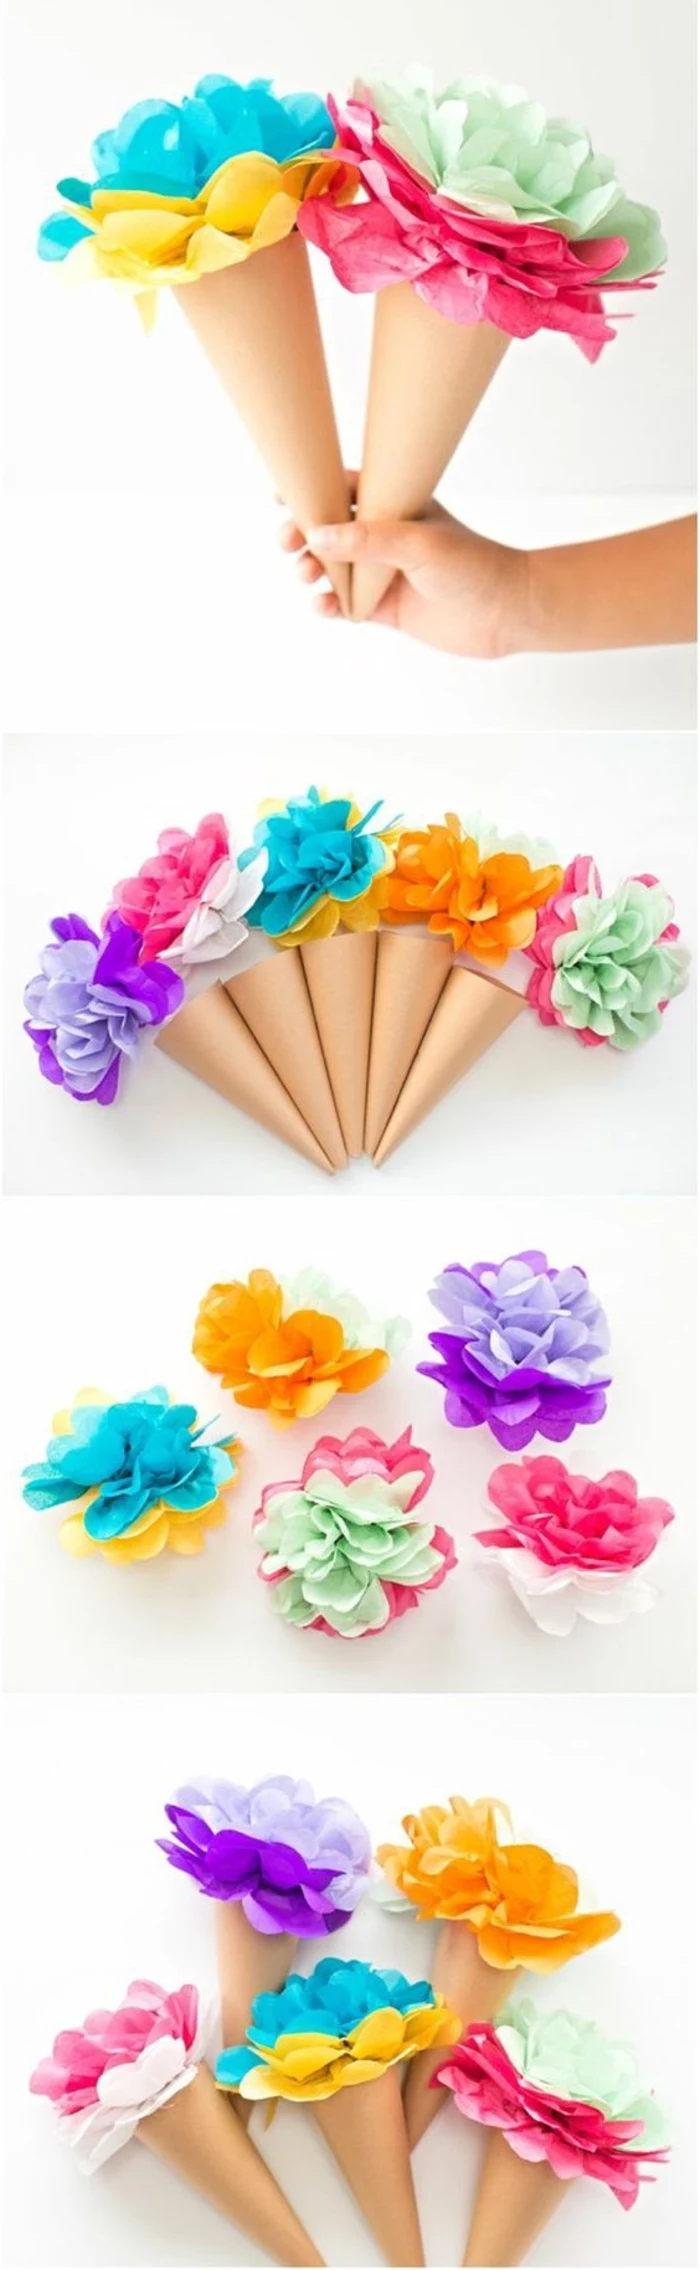 paper cones, indoor group games for kids, colourful flowers, made of paper